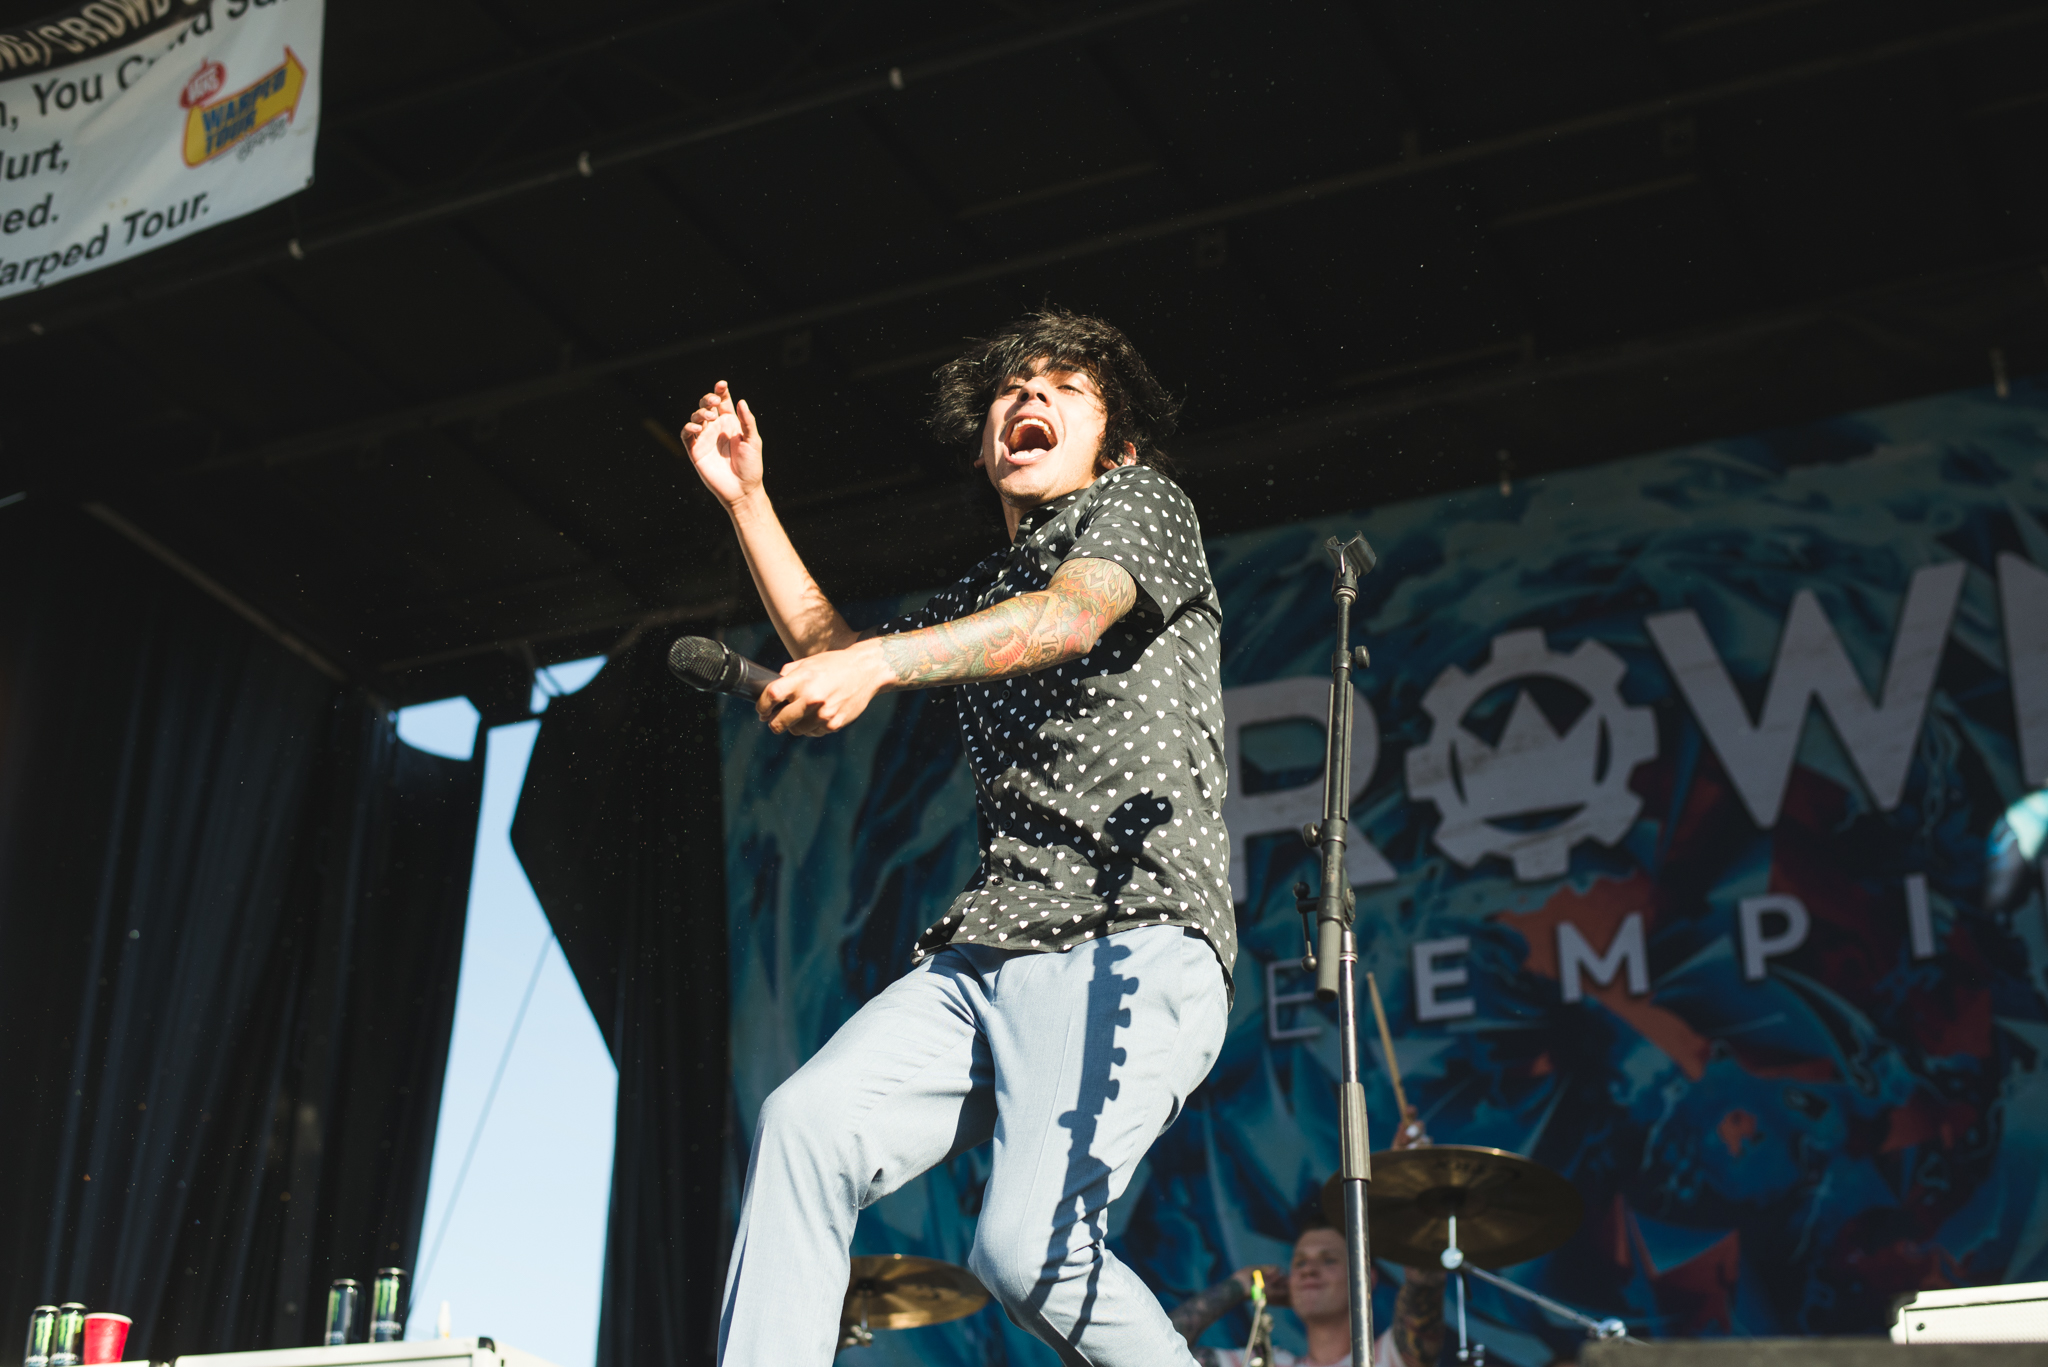 Crown The Empire - Photo by Lindsey Blane